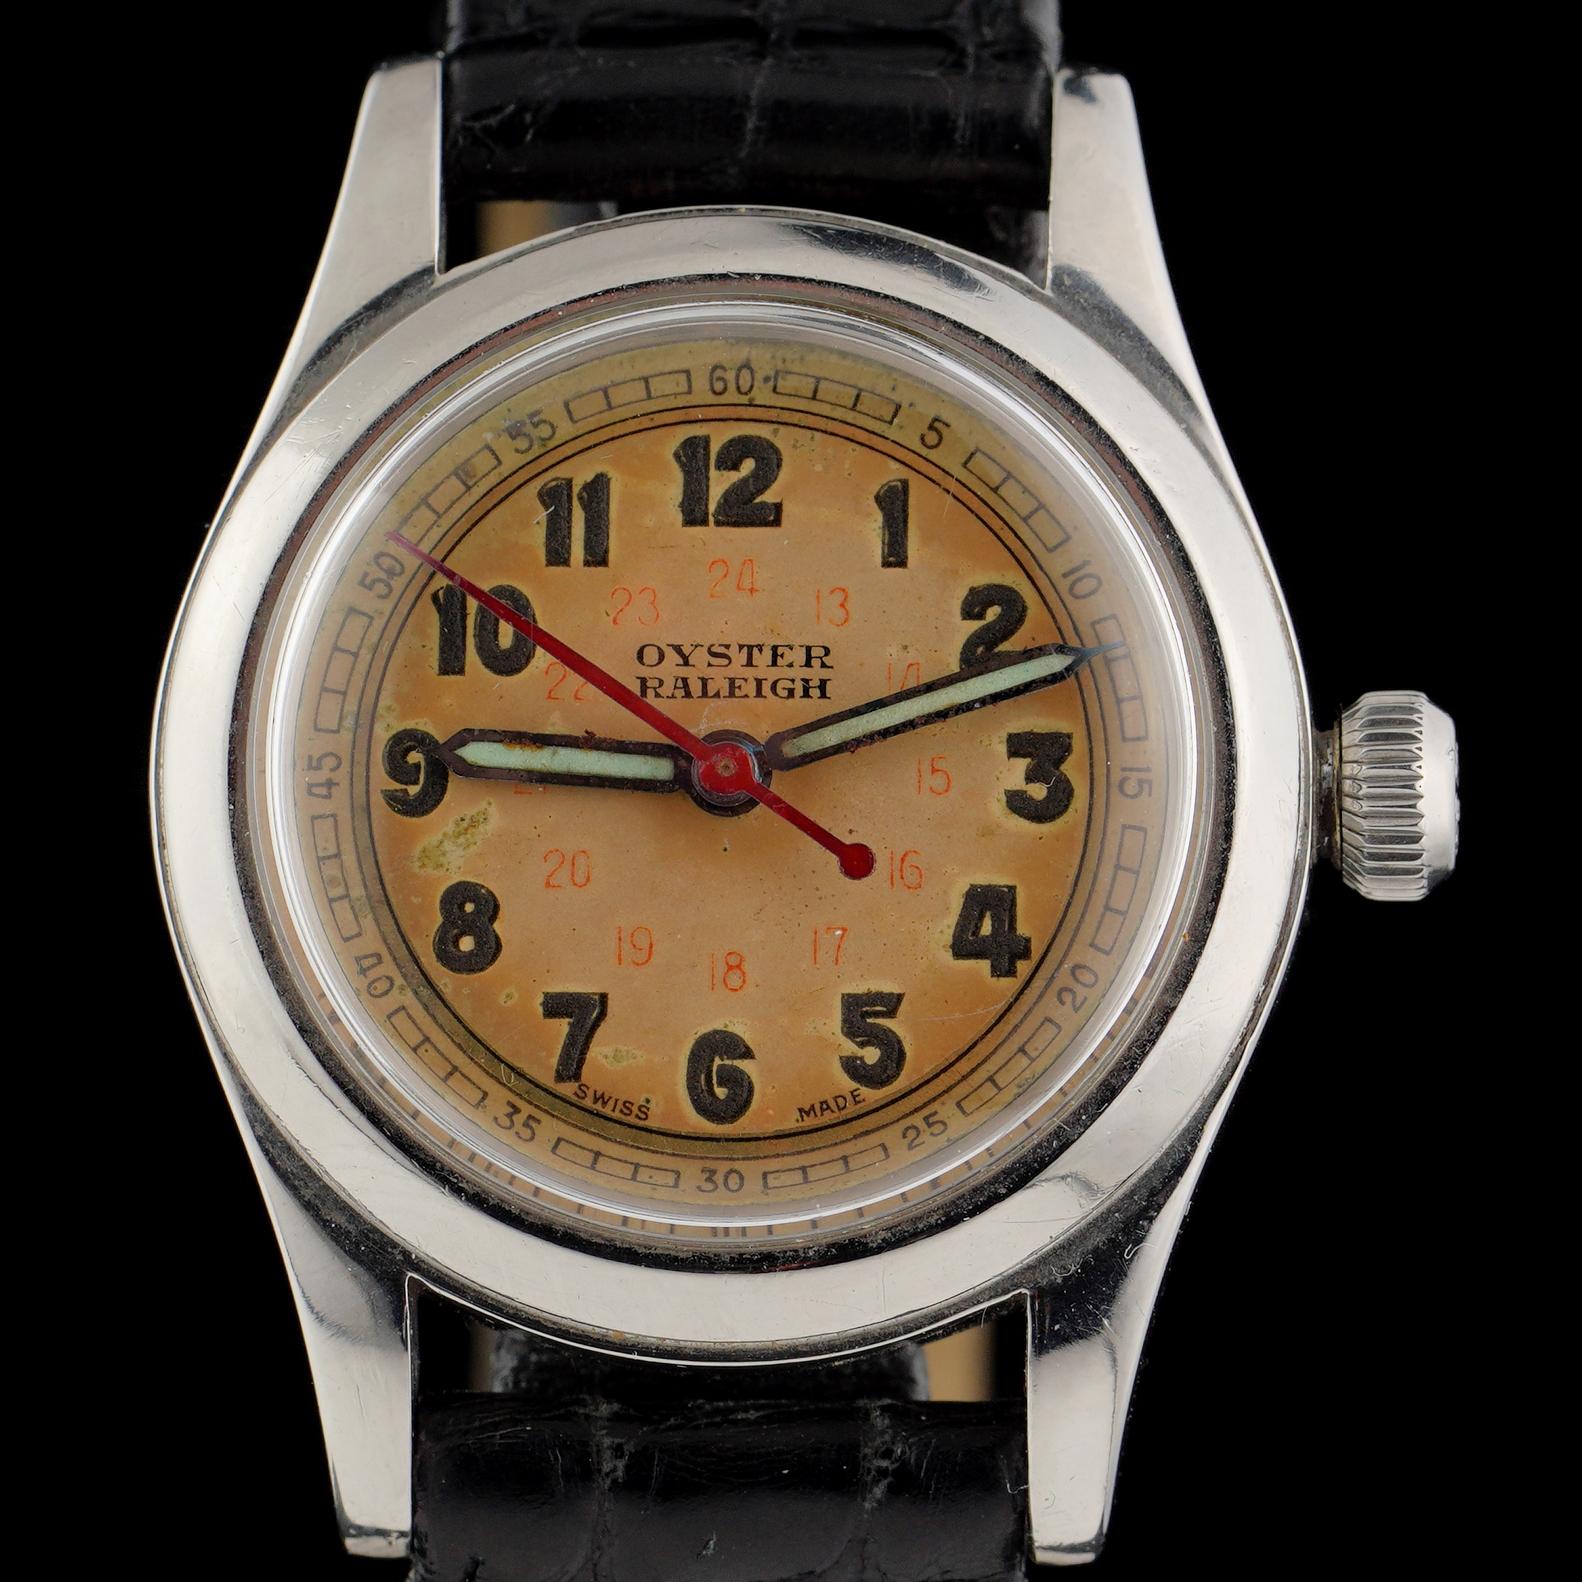 Rolex Oyster Rayleigh WWII Military Wristwatch.
Made in 1940s.

The wristwatch was designed to withstand rigorous conditions with features like screw-down case back and crown, water-resistance up to 30 meters (100ft), and made of durable stainless